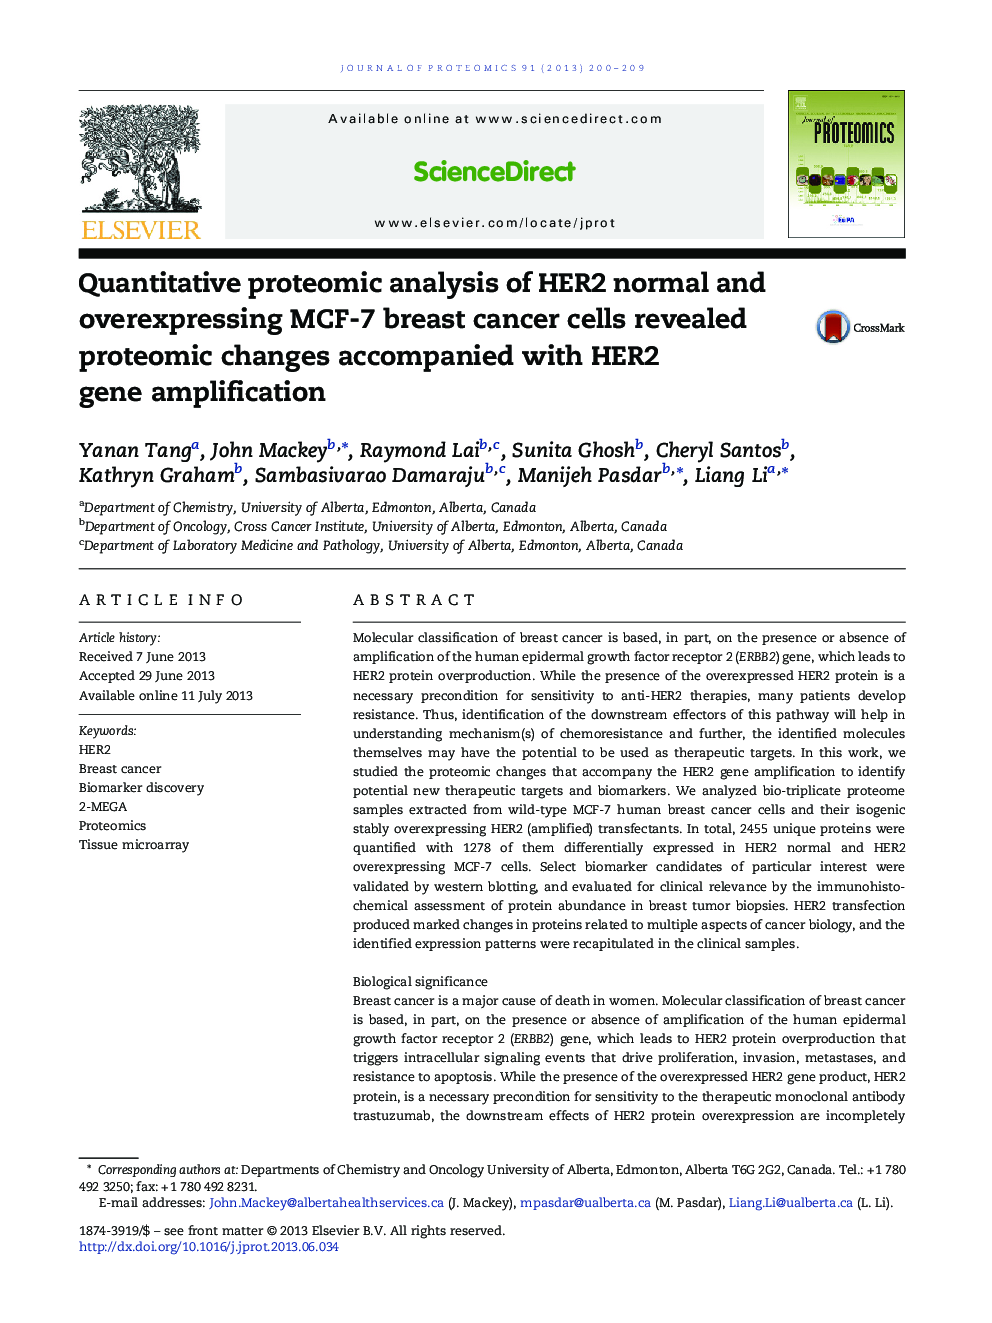 Quantitative proteomic analysis of HER2 normal and overexpressing MCF-7 breast cancer cells revealed proteomic changes accompanied with HER2 gene amplification